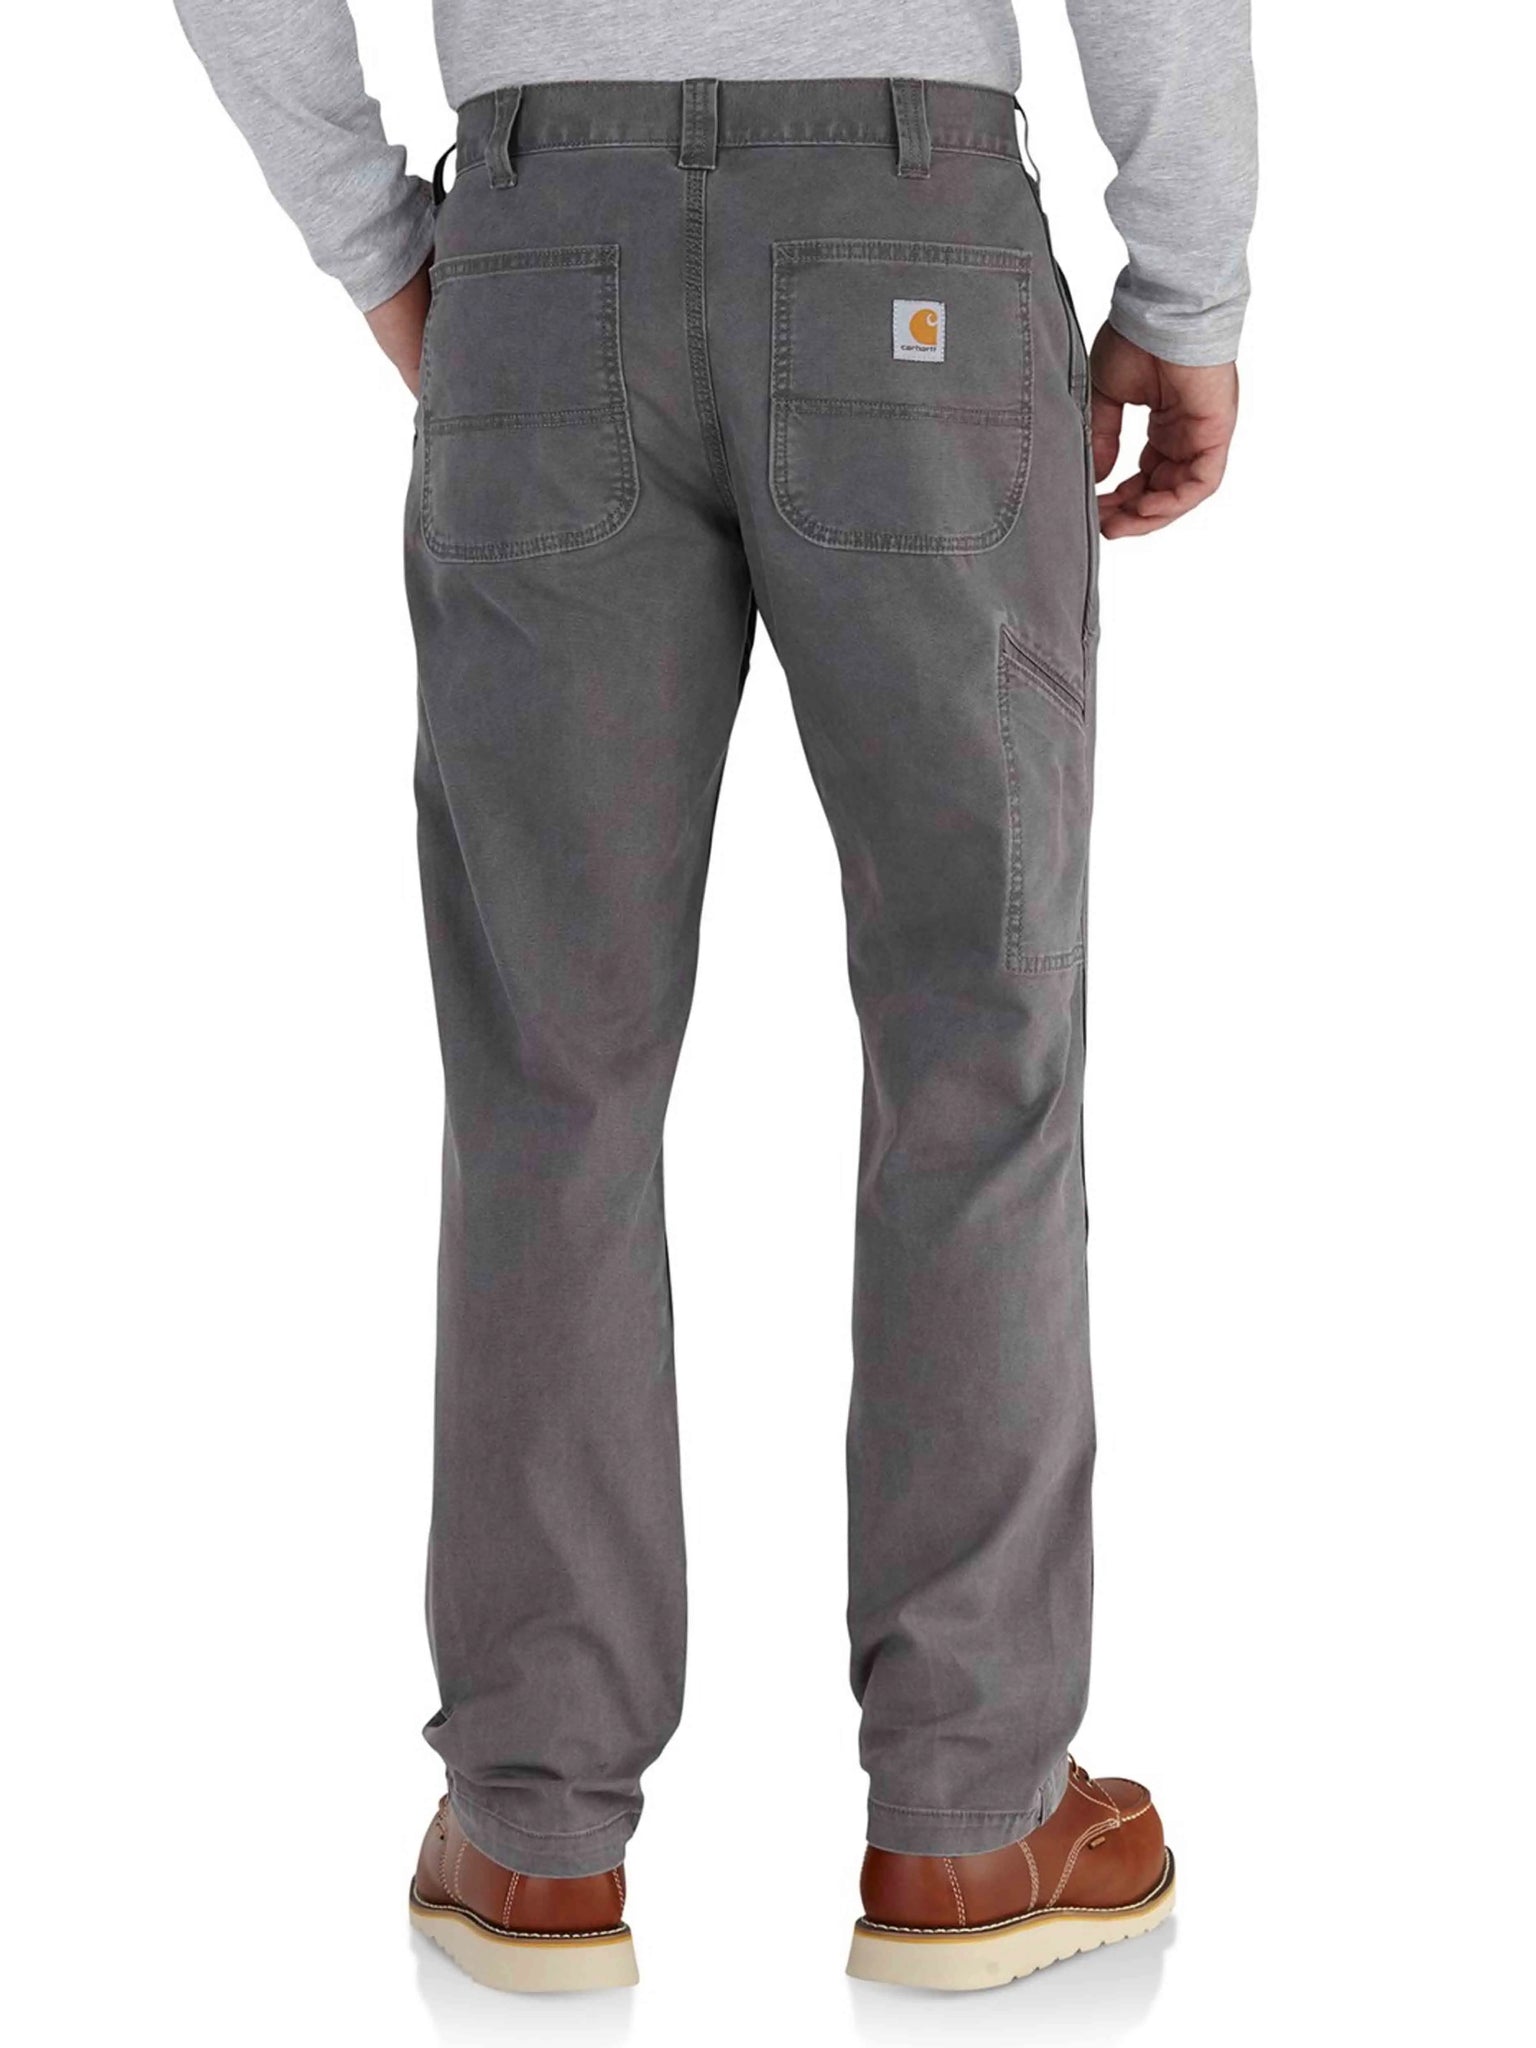 Carhartt Rugged Flex Rigby Relaxed Fit Pant Gravel Prior